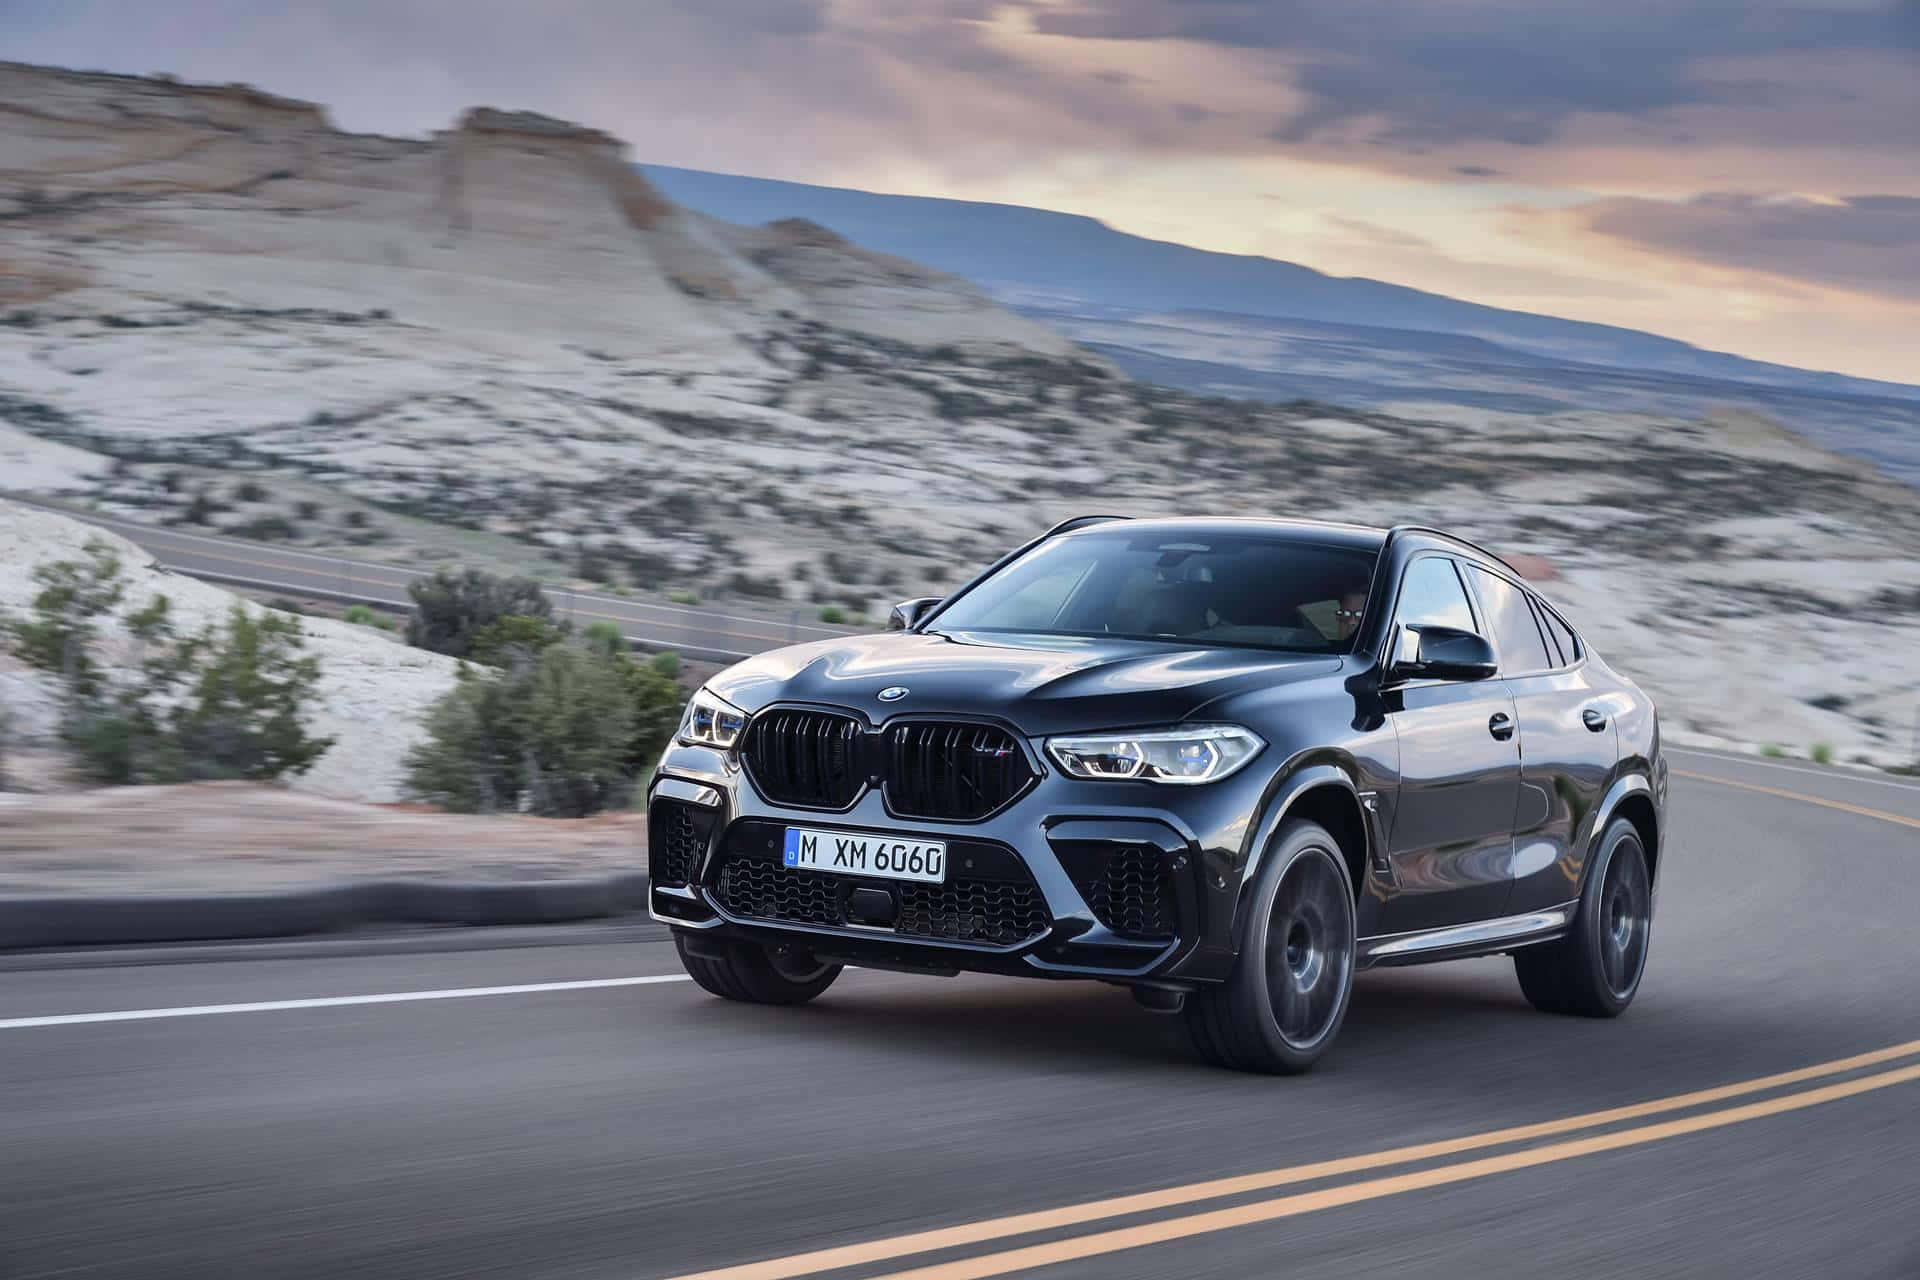 The Bmw X6 Is Driving Down A Mountain Road